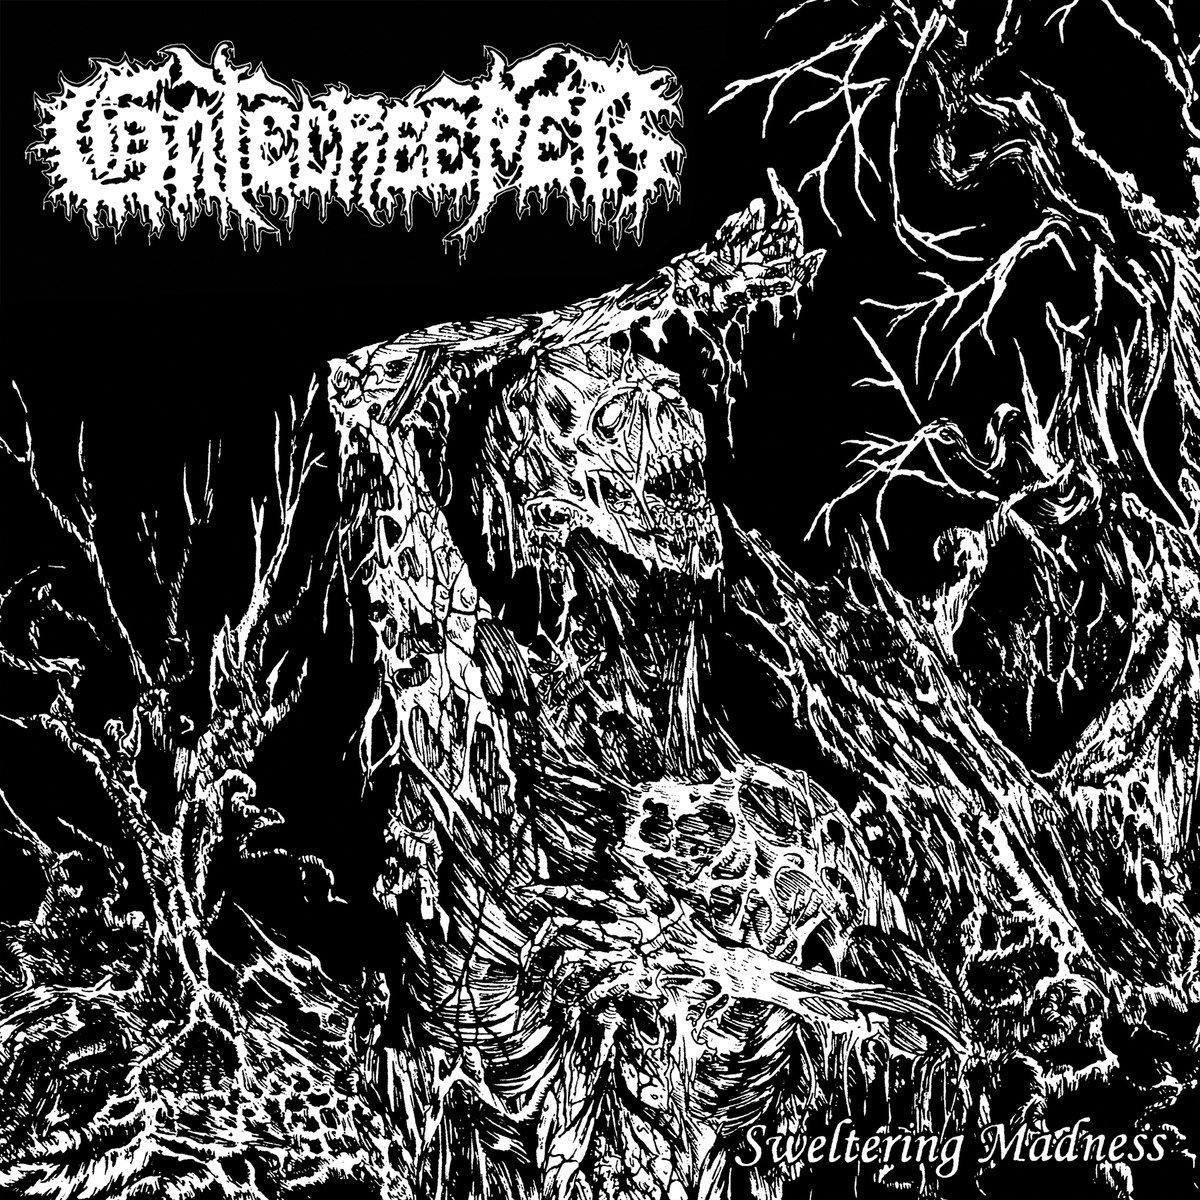 Buy – Gatecreeper "Sweltering Madness" 7" – Band & Music Merch – Cold Cuts Merch